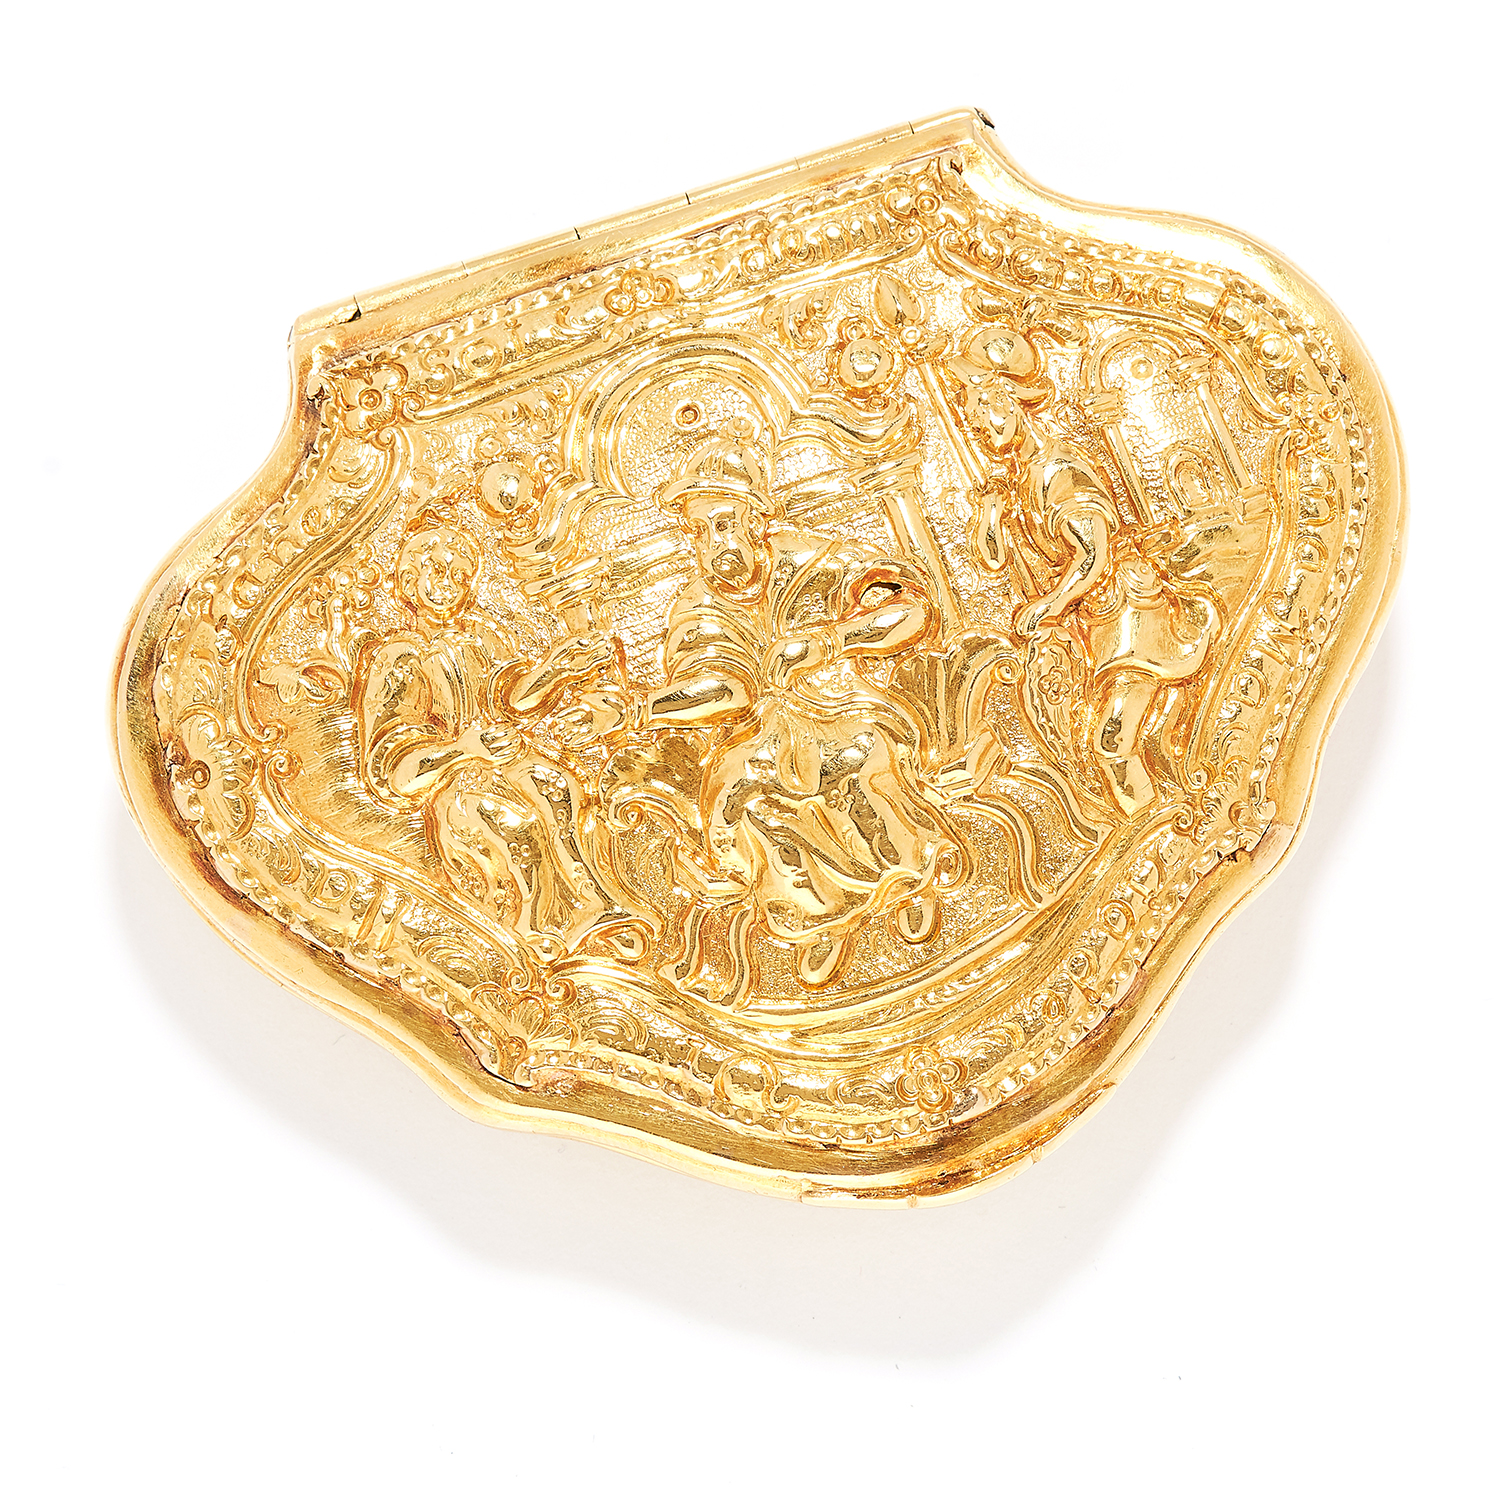 ANTIQUE GOLD REGIMENTAL SNUFF BOX, CIRCA 1750 in 18ct yellow gold, the lid is set with a scene of